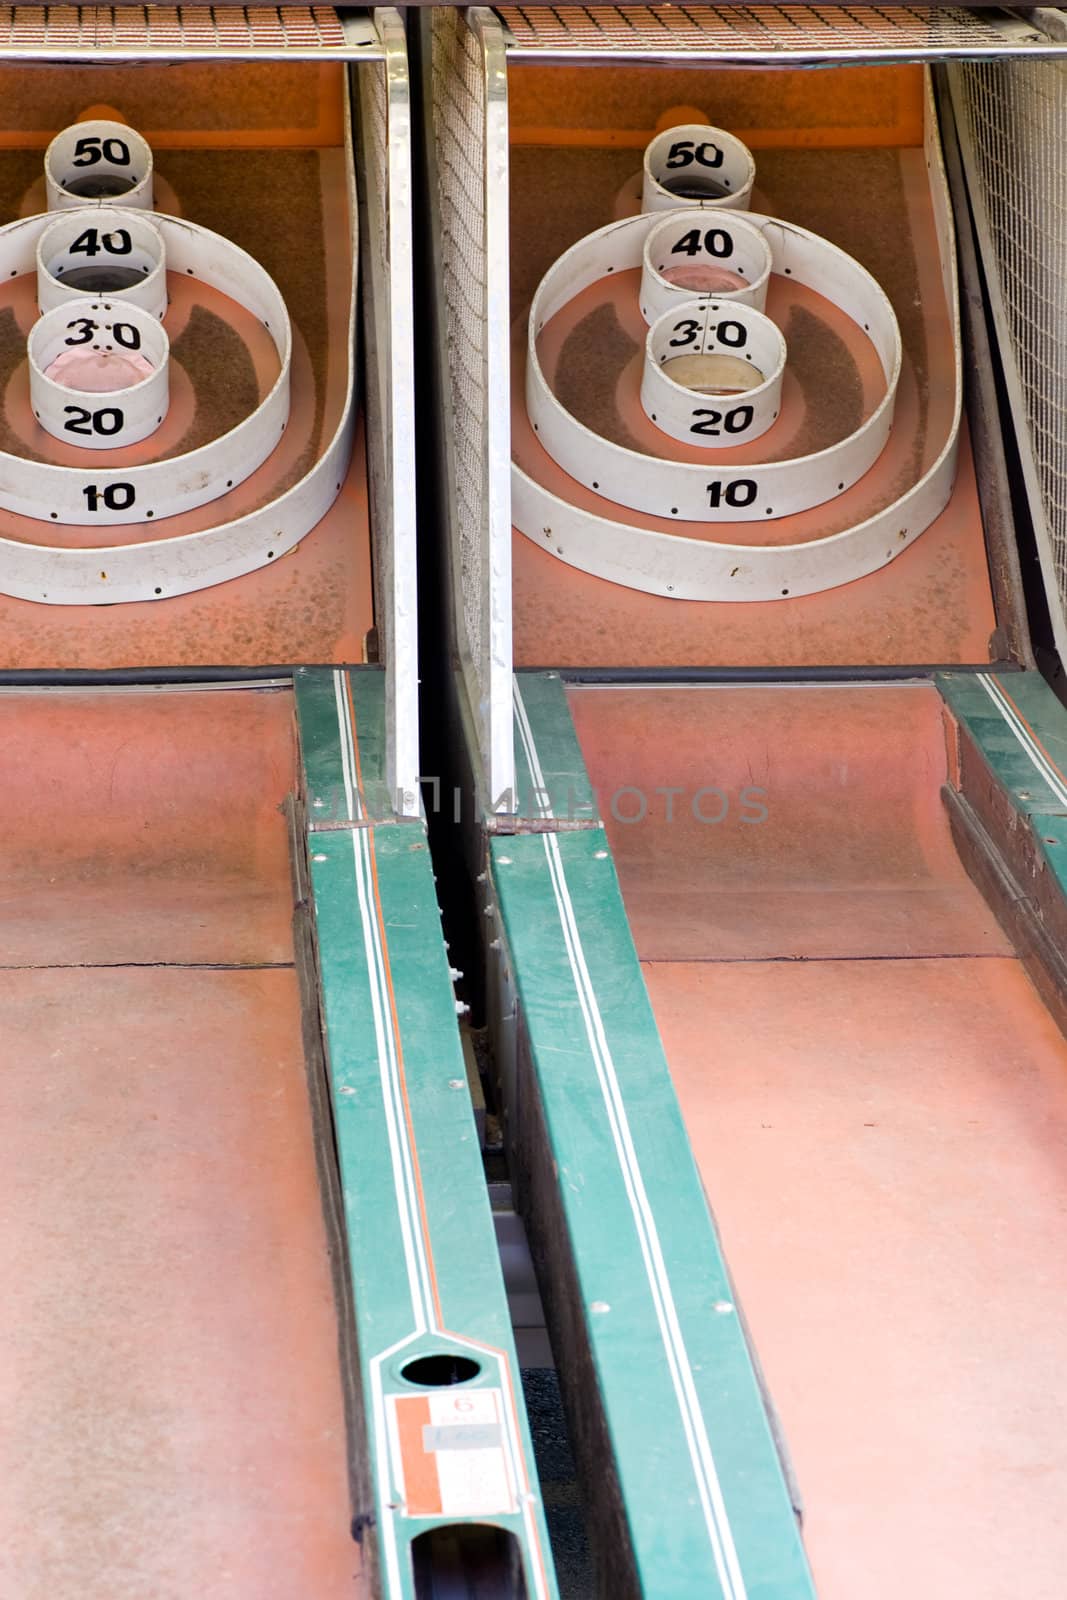 2 lanes of a skeeball game from a traveling amusement company.